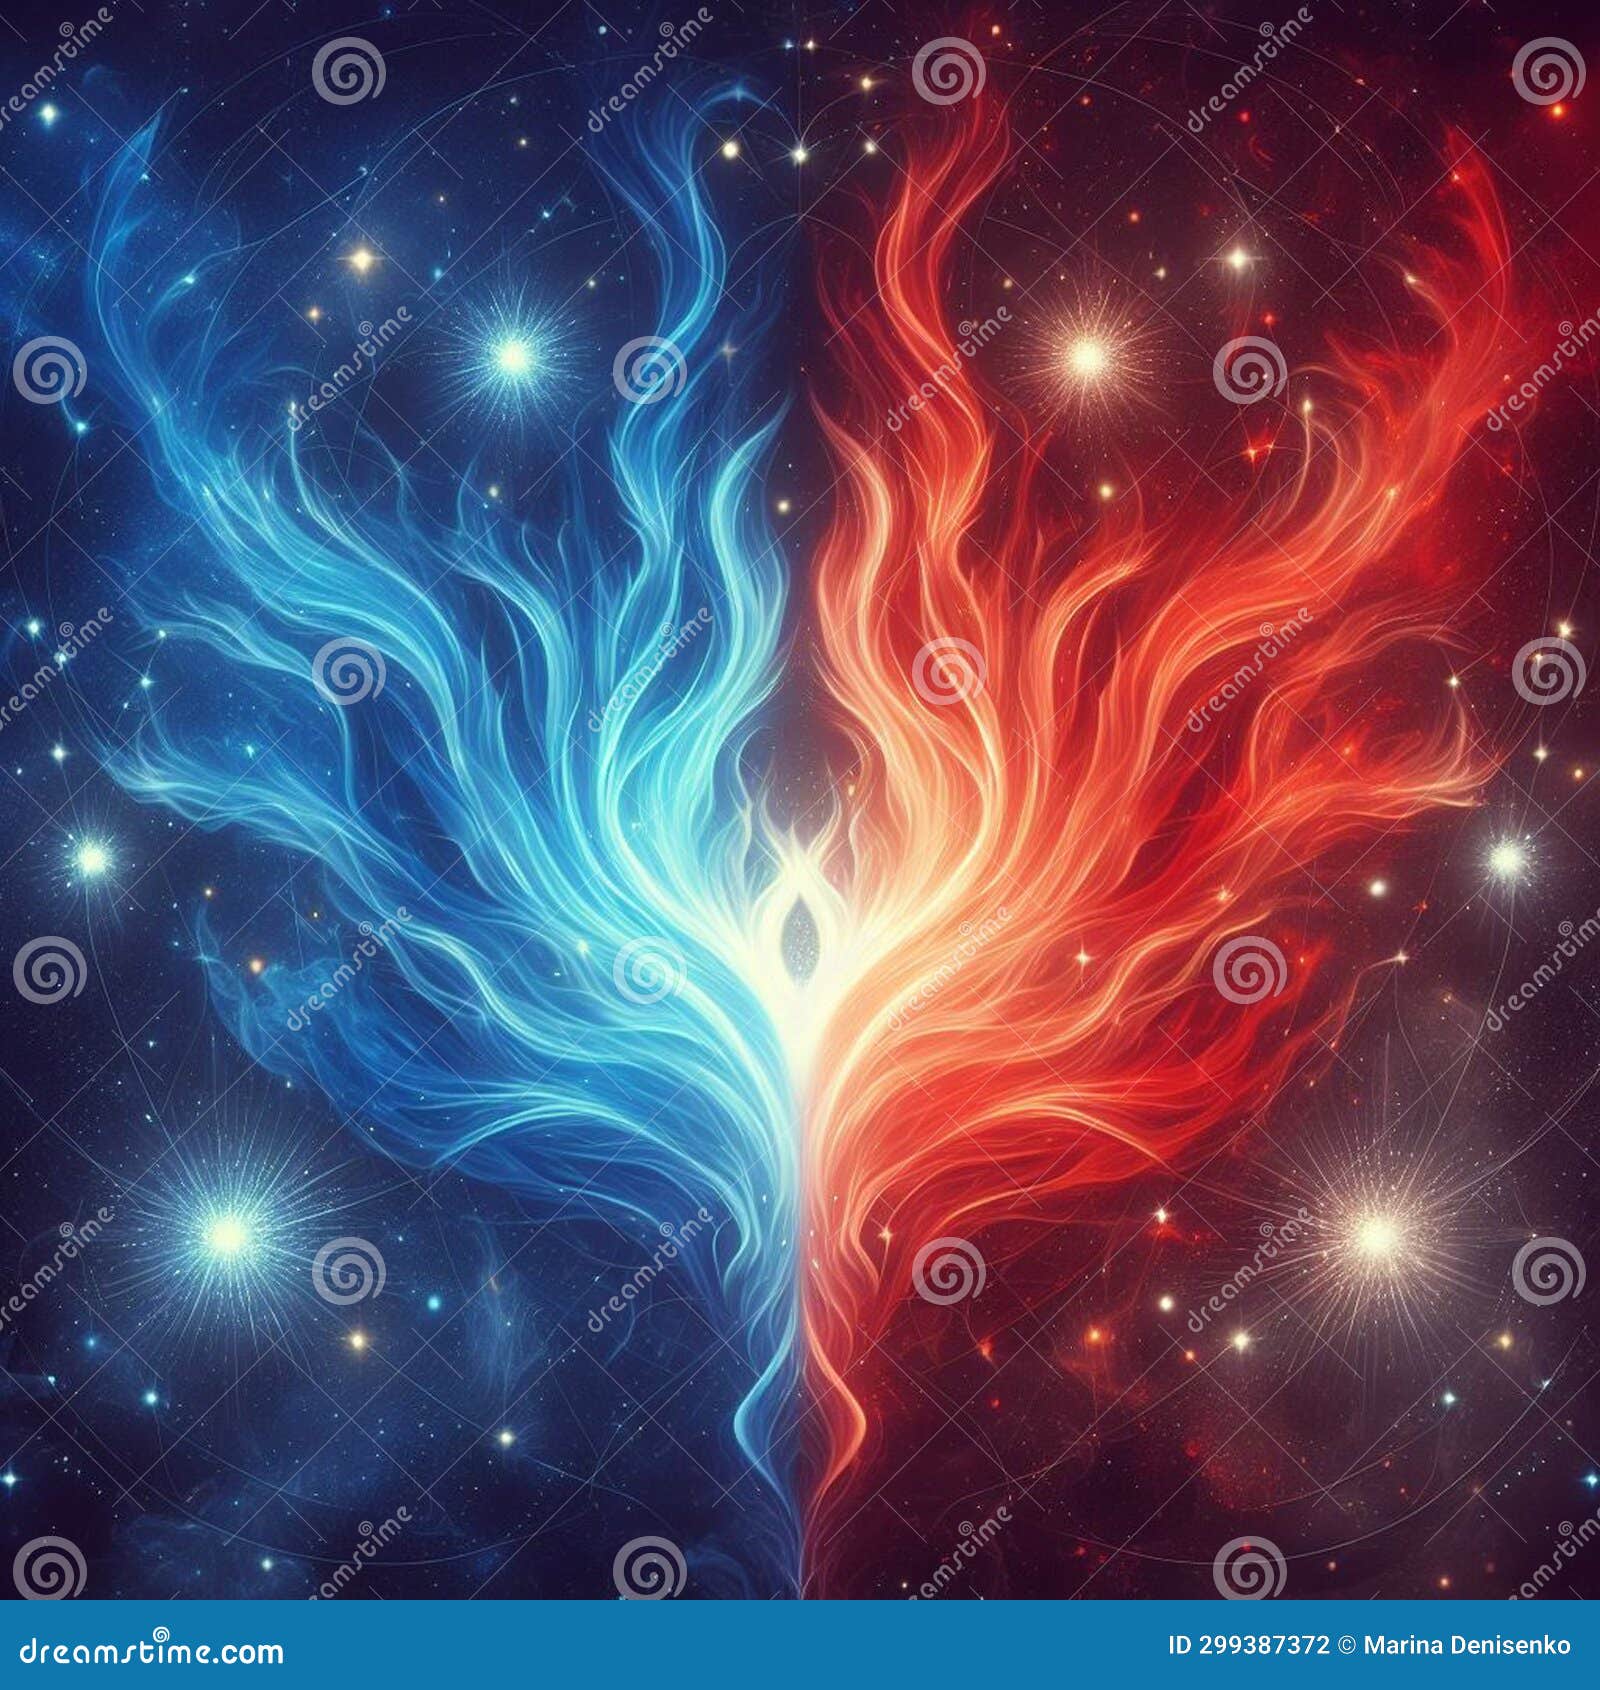 Orange and Blue Abstract Flame. Twin Flame Logo. Esoteric Concept of ...